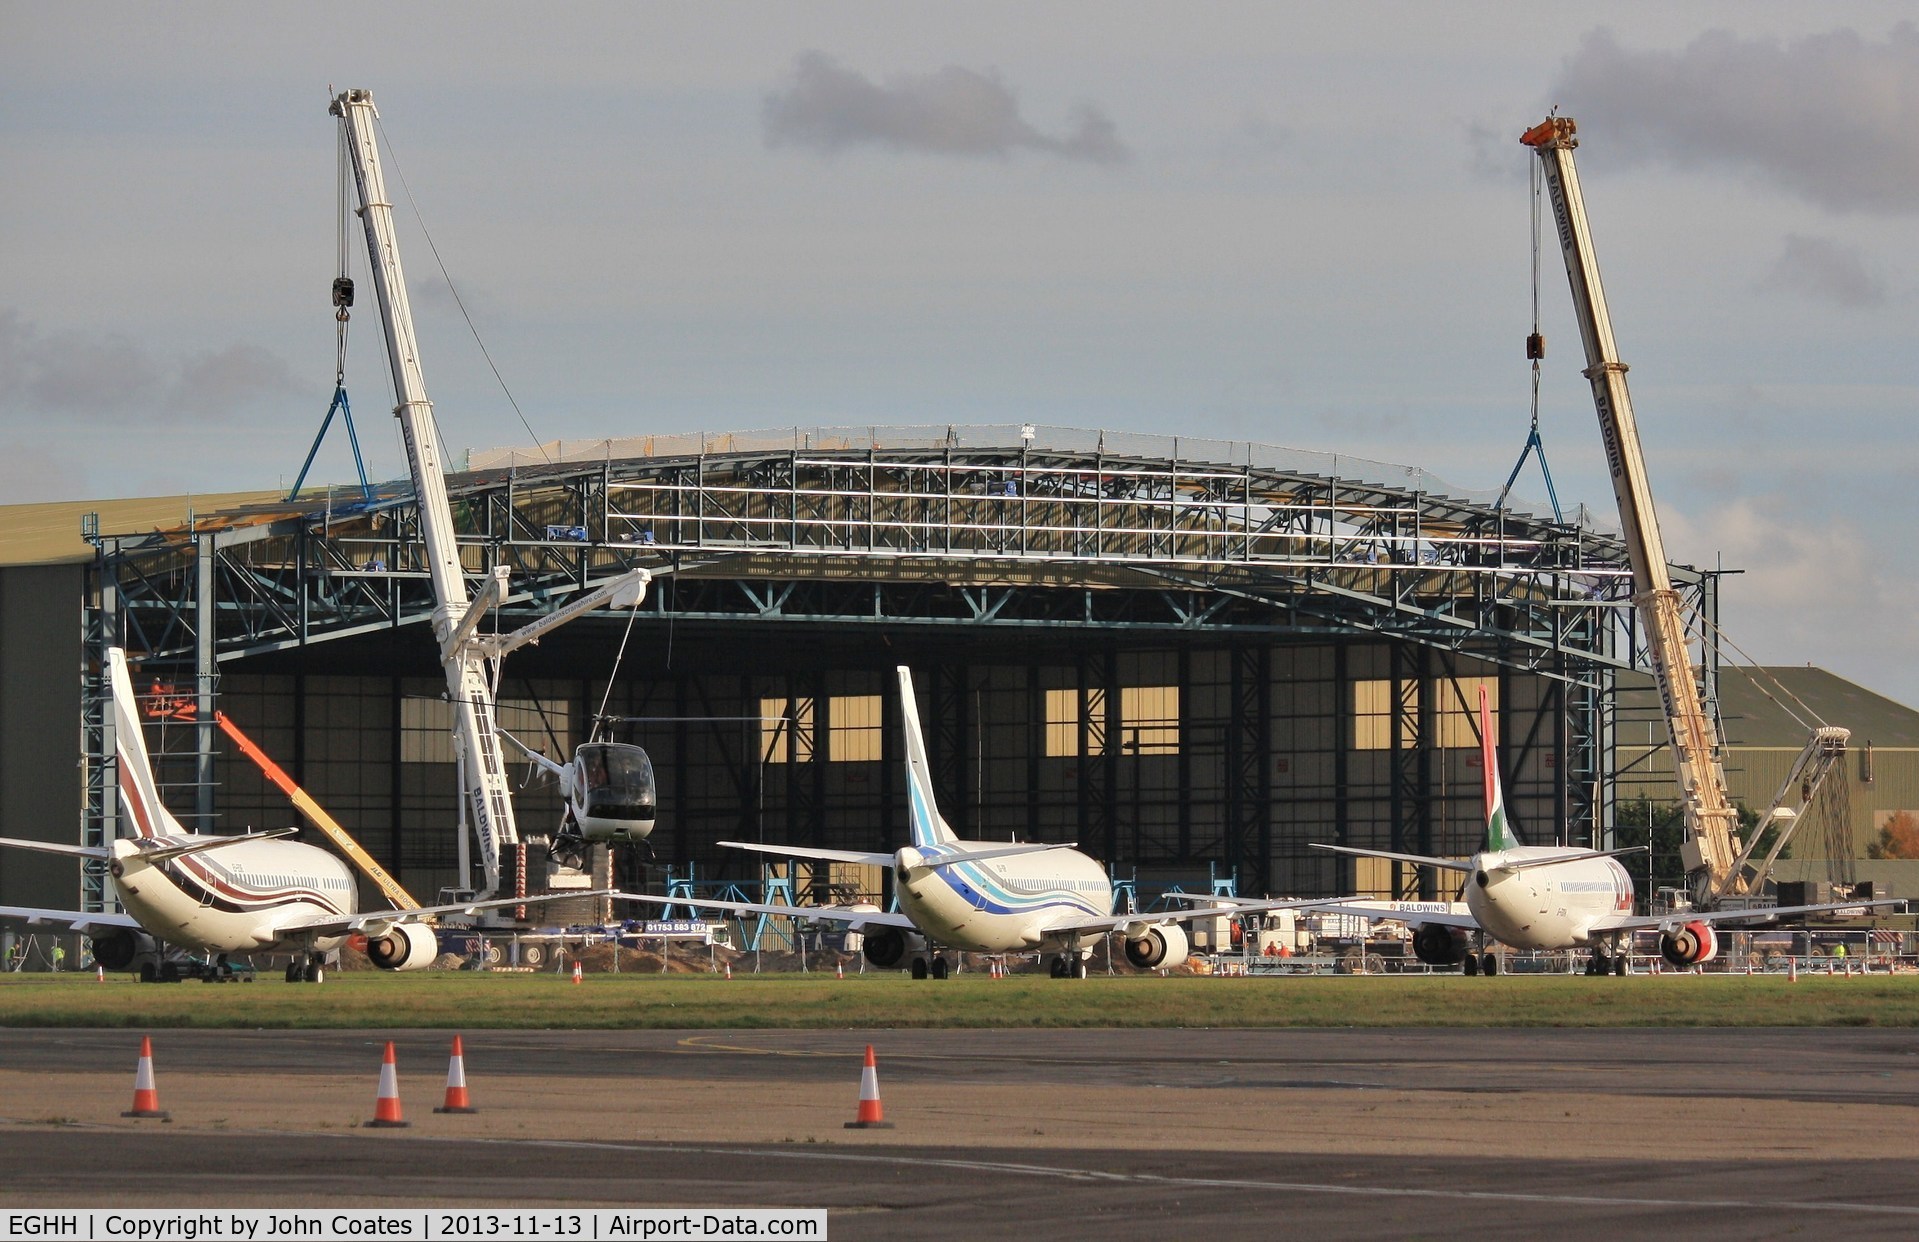 Bournemouth Airport, Bournemouth, England United Kingdom (EGHH) - Hangar extension for new B748BBJ taking shape - flyby by G-EMOL.